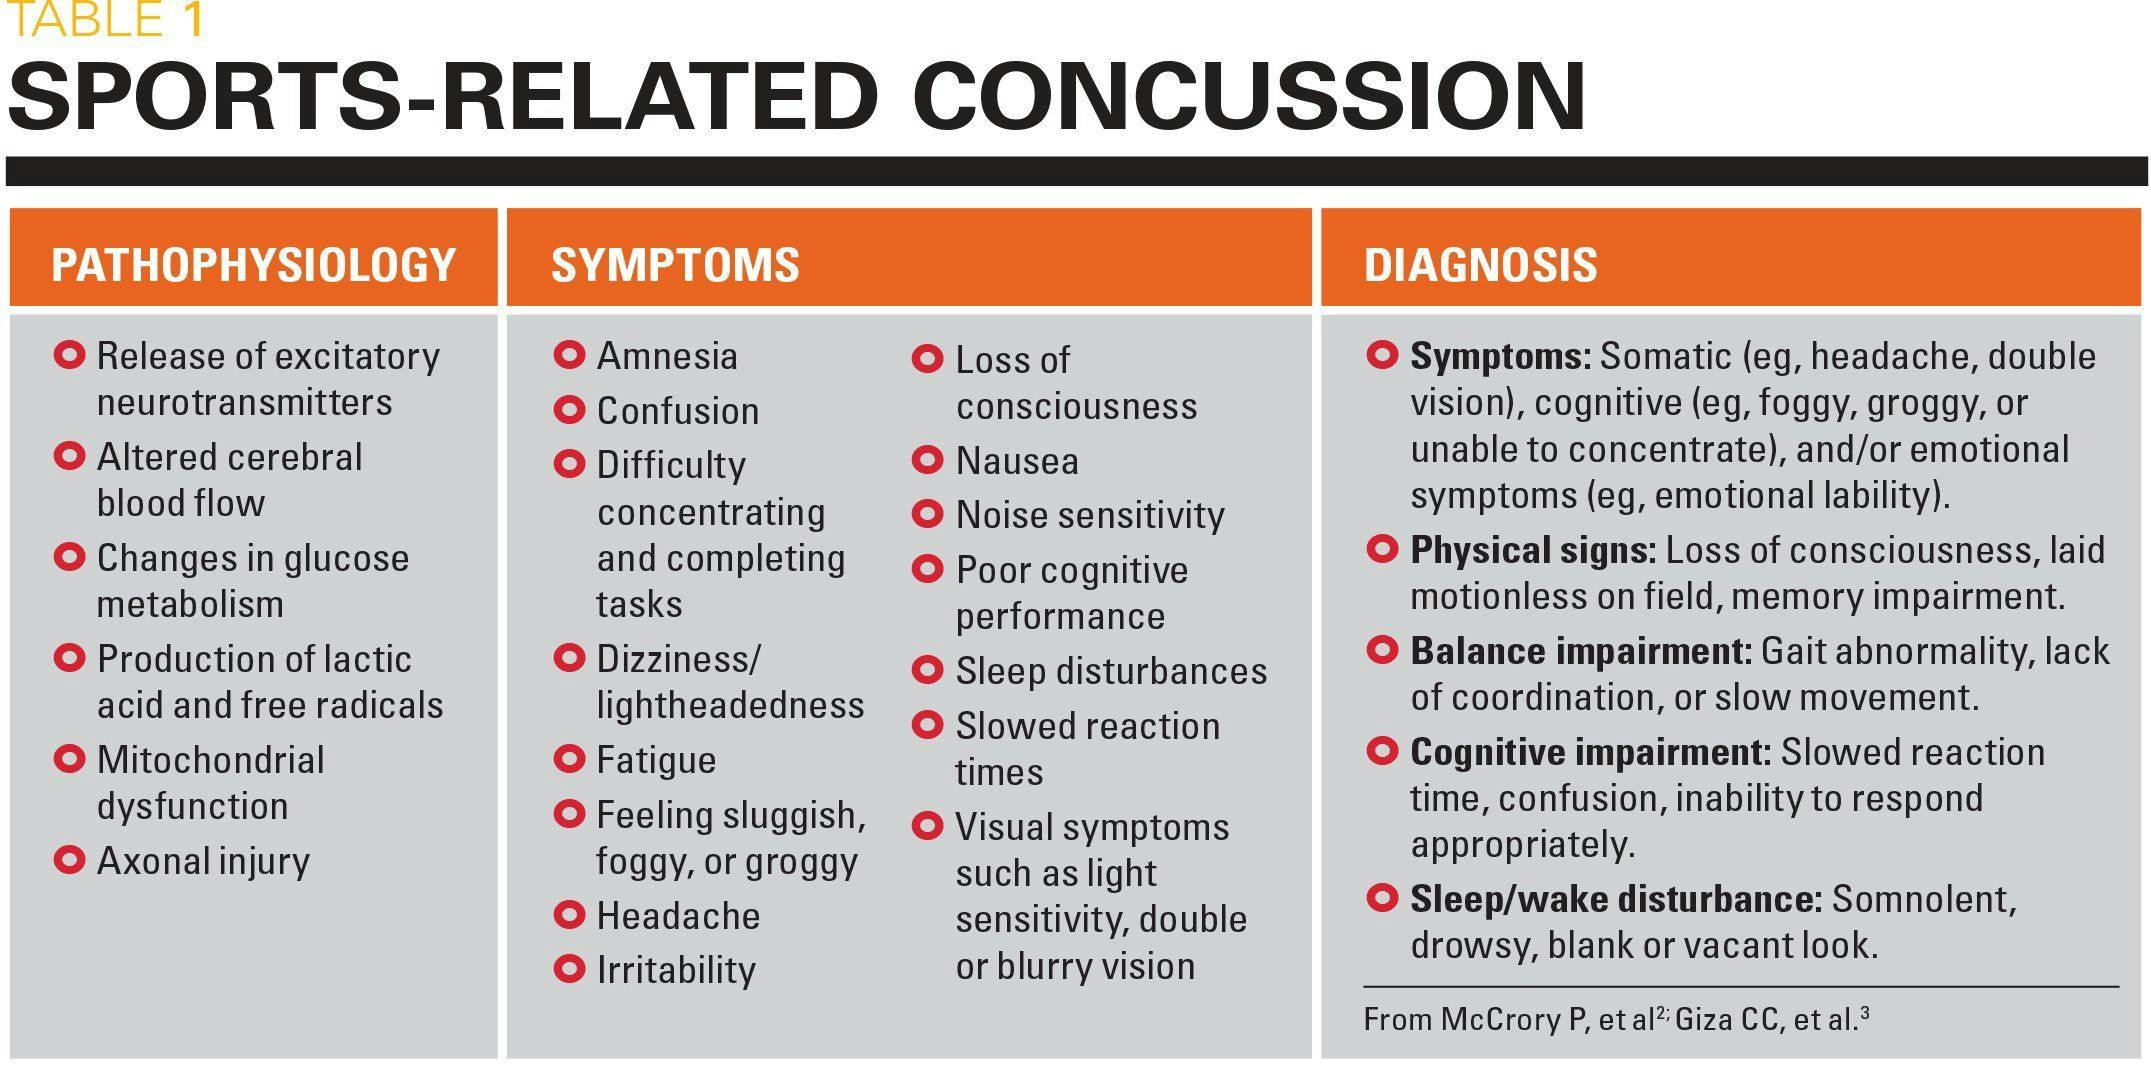 Sports-related concussion - pathophysiology, symptoms, and diagnosis